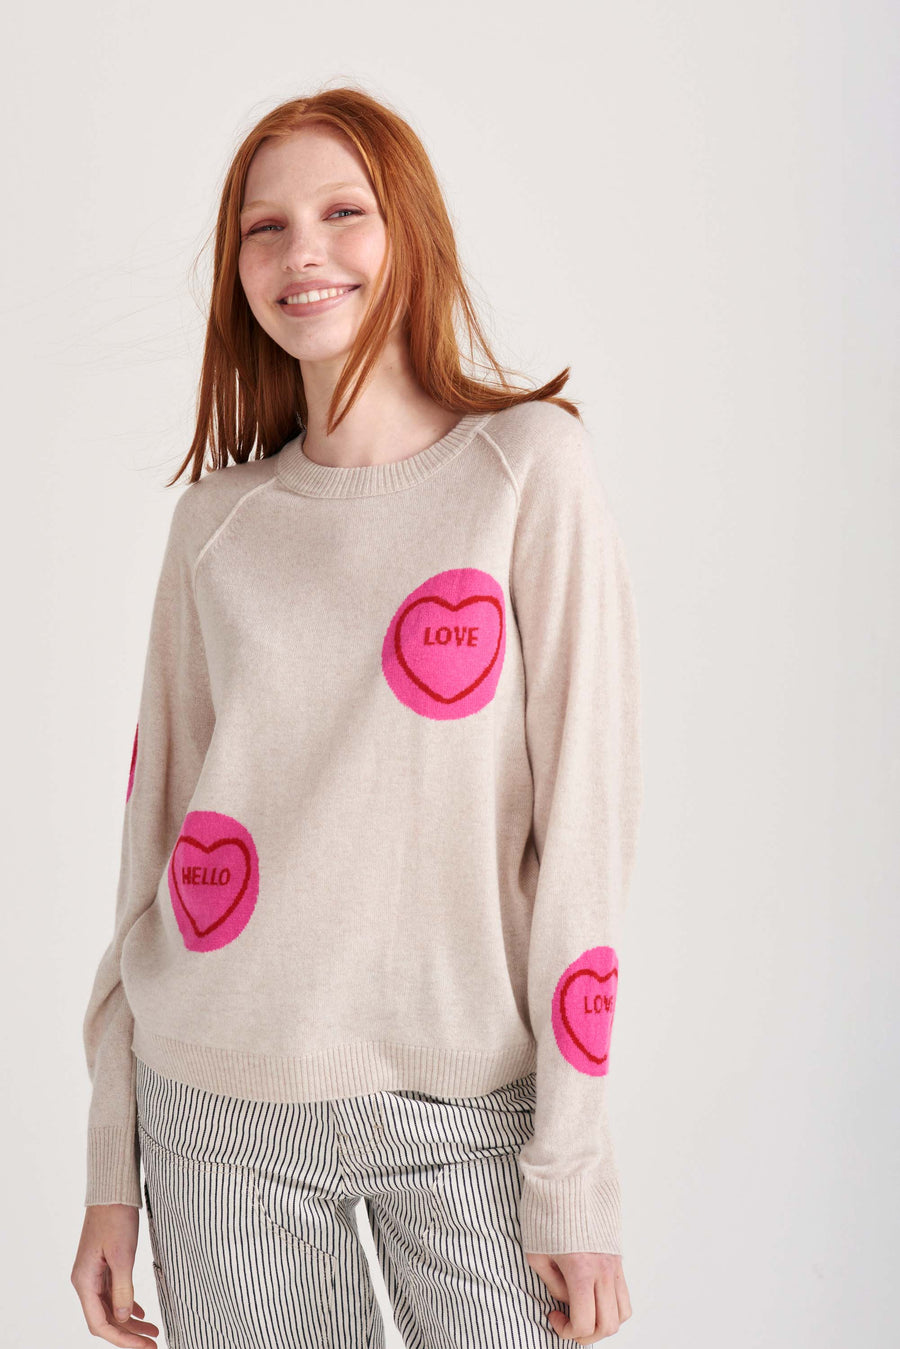 All Over Lovehearts Sweater